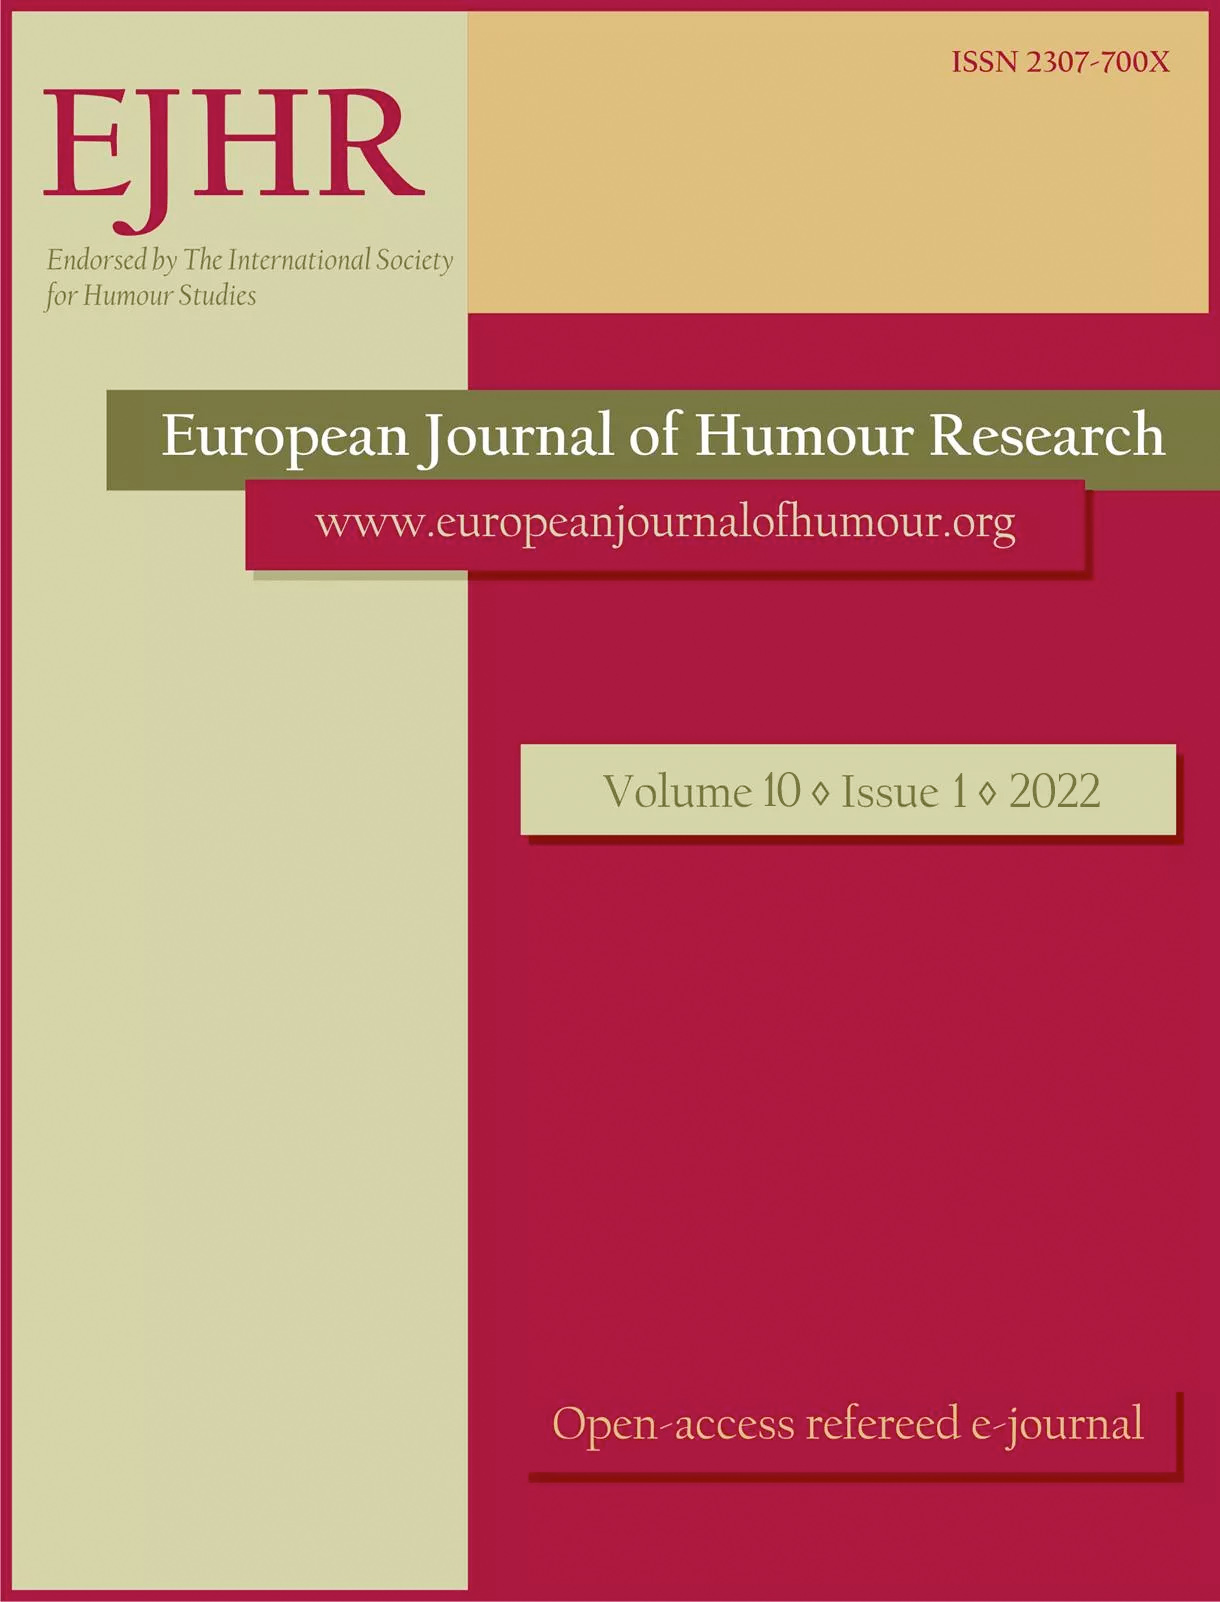 Ten years of the European Journal of Humour
Research